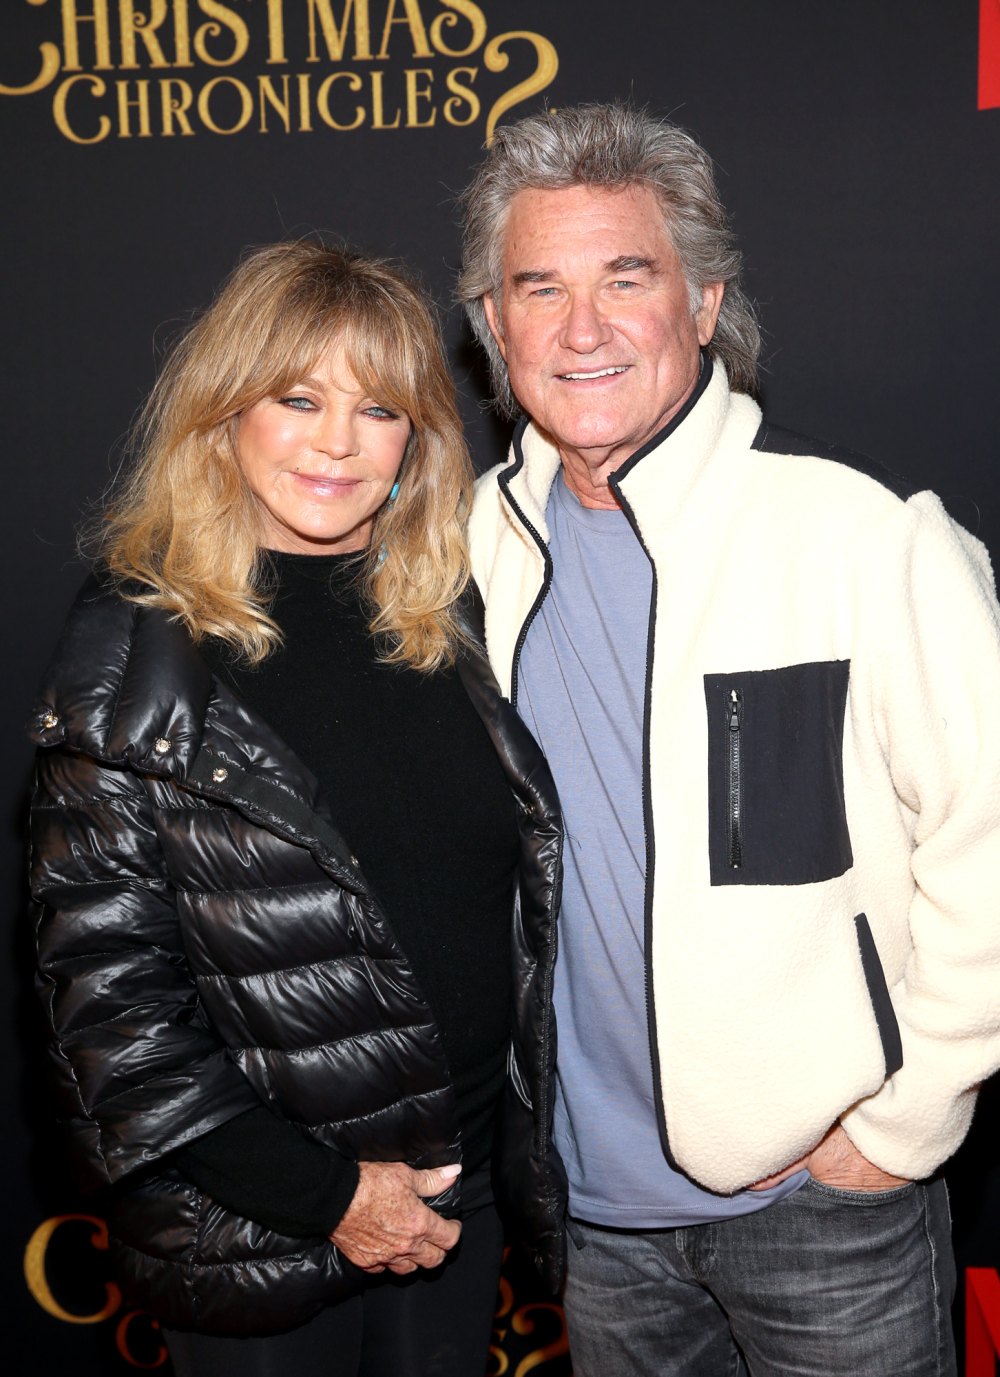 Kurt Russell and Goldie Hawn have Discussed Marriage